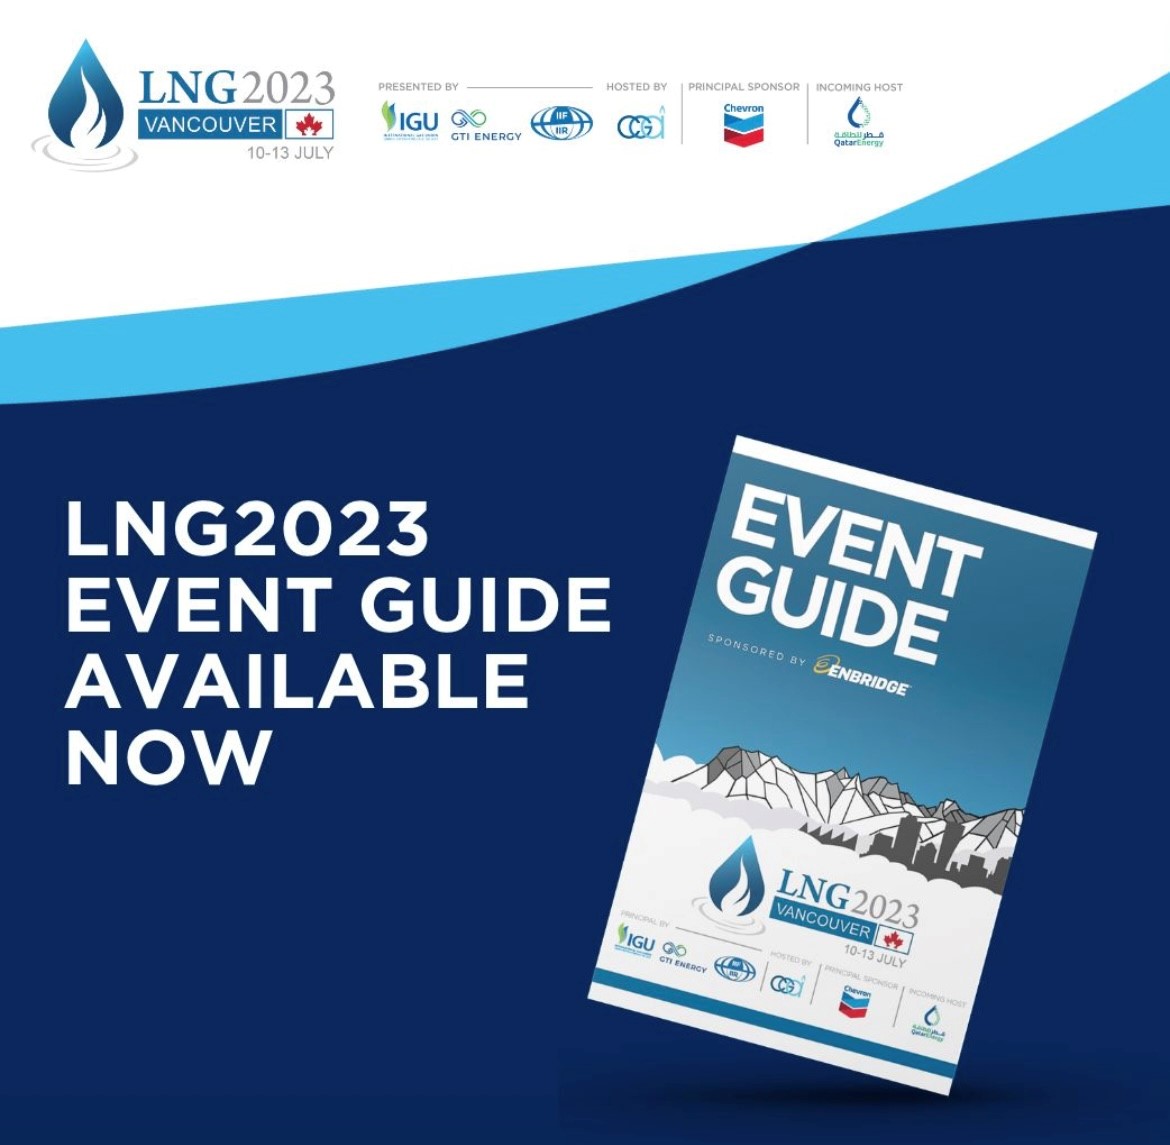 The #LNG2023 Event Guide is available to all Conference Delegates. Collect yours at the venue upon arrival. #LNGindustry #LNGconference #LNGevent #gasindustry #gasconference #energyevent #vancouverevent